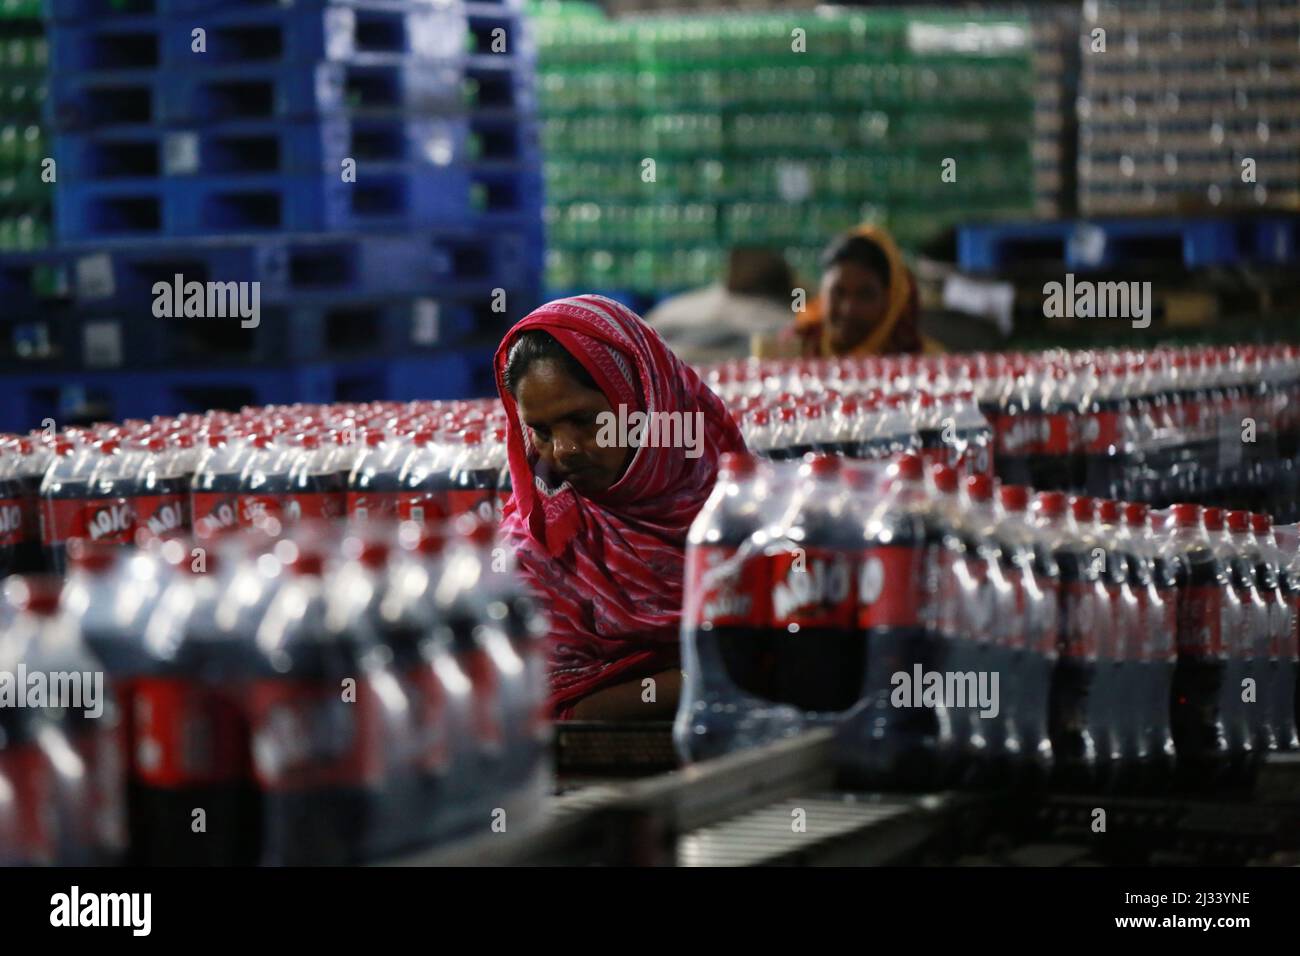 Plastic bottles of soft drink are seen on an assembly line at a beverage factory in Dhaka, Bangladesh January 5, 2020. Bangladesh’s GDP is expected to grow by 4.5 percent in fiscal year 2020 and 7.5 percent in fiscal year 2021, according to the Asian Development Bank (ADB) report of Asian Development Outlook (ADO) 2020. Stock Photo